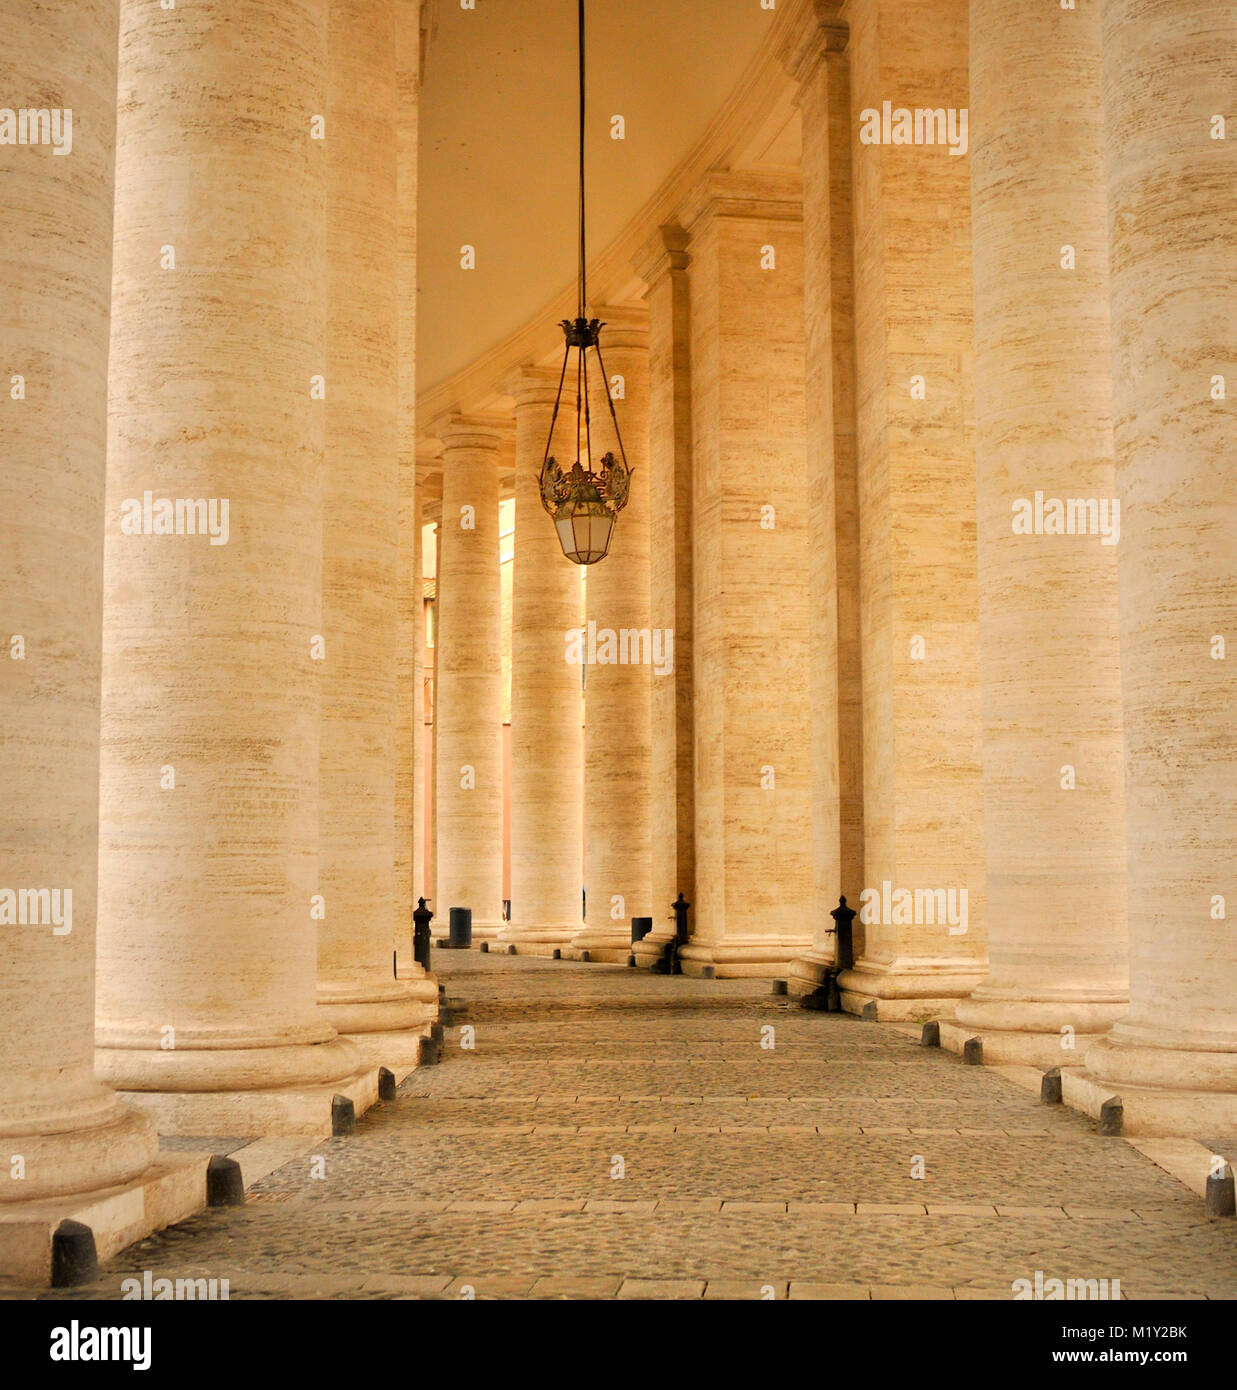 A close up view of columns in one of the Colonnades, Vatican City Stock Photo